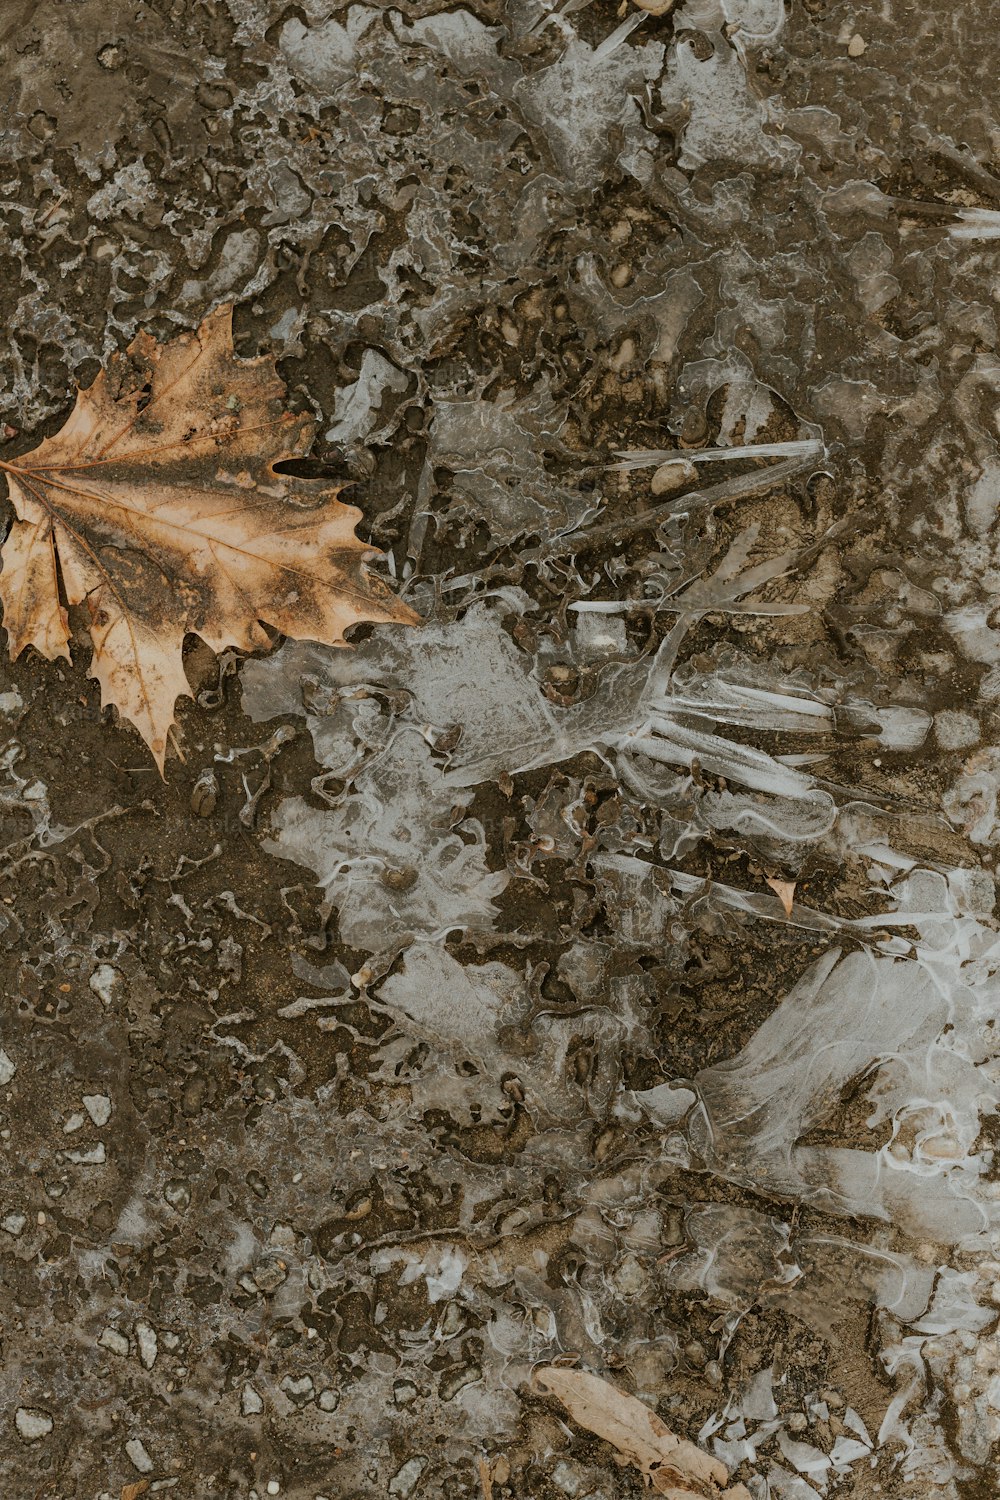 a leaf laying on the ground with ice on it